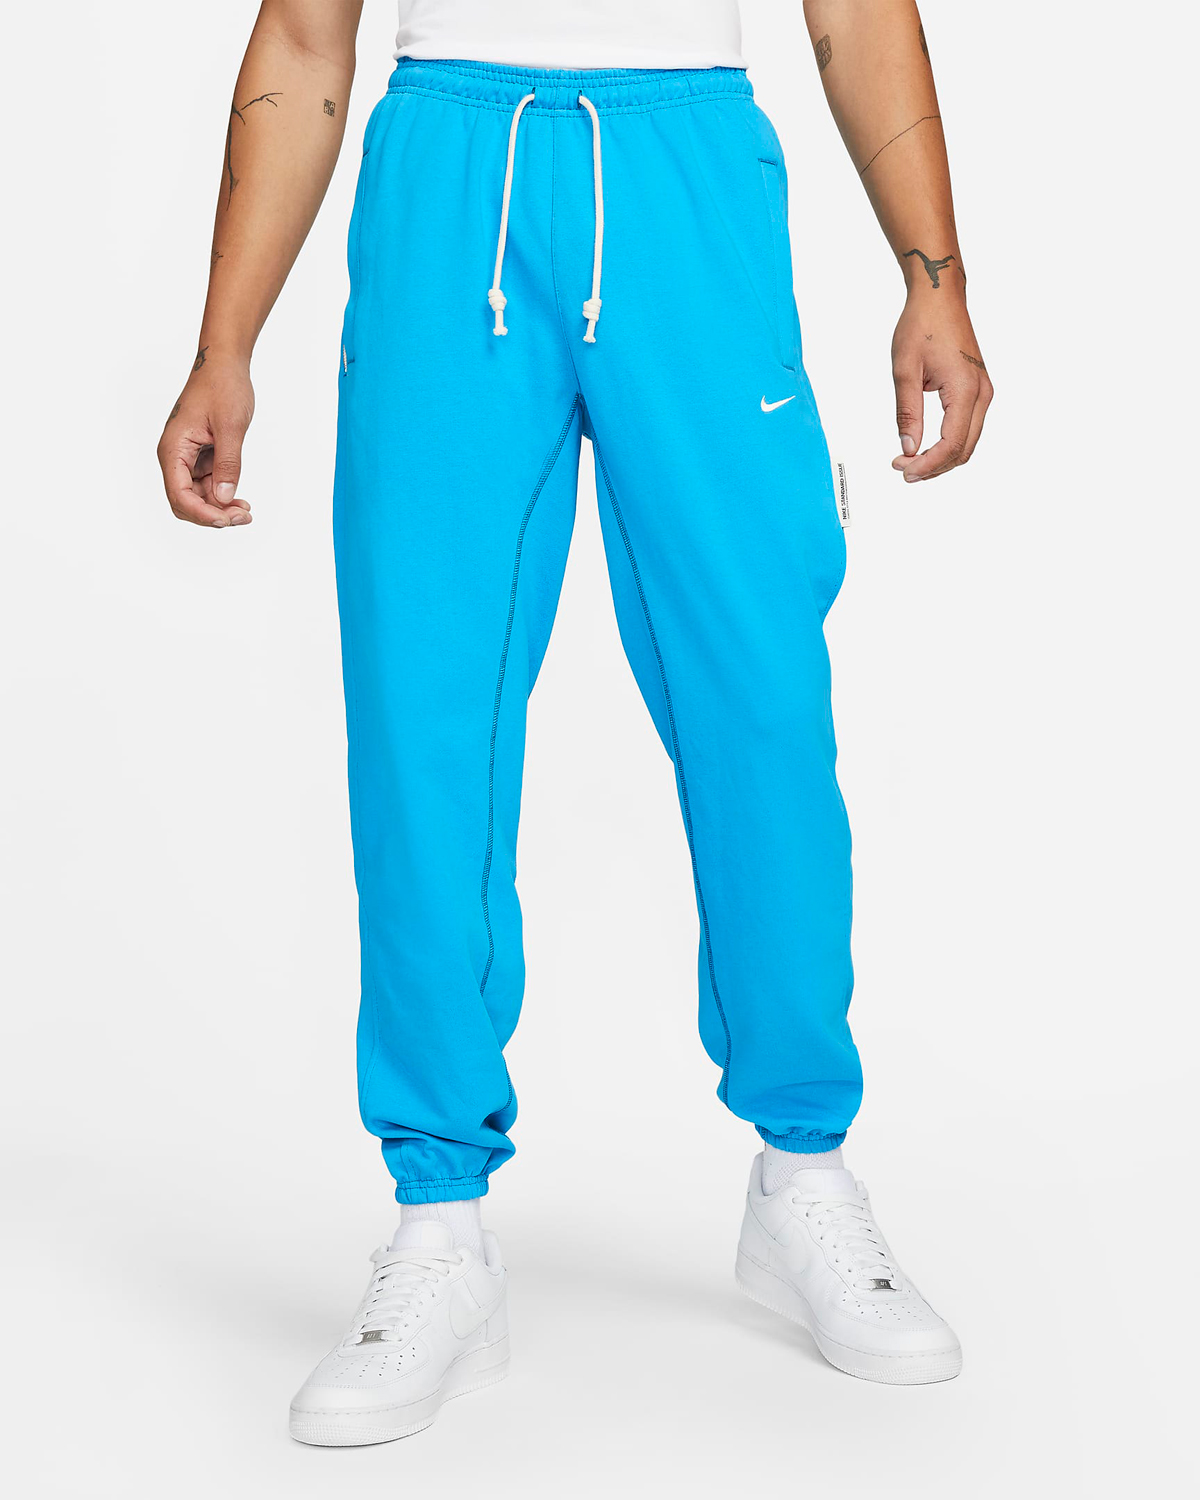 Nike Dunk High Laser Blue Shirts Clothing Outfits